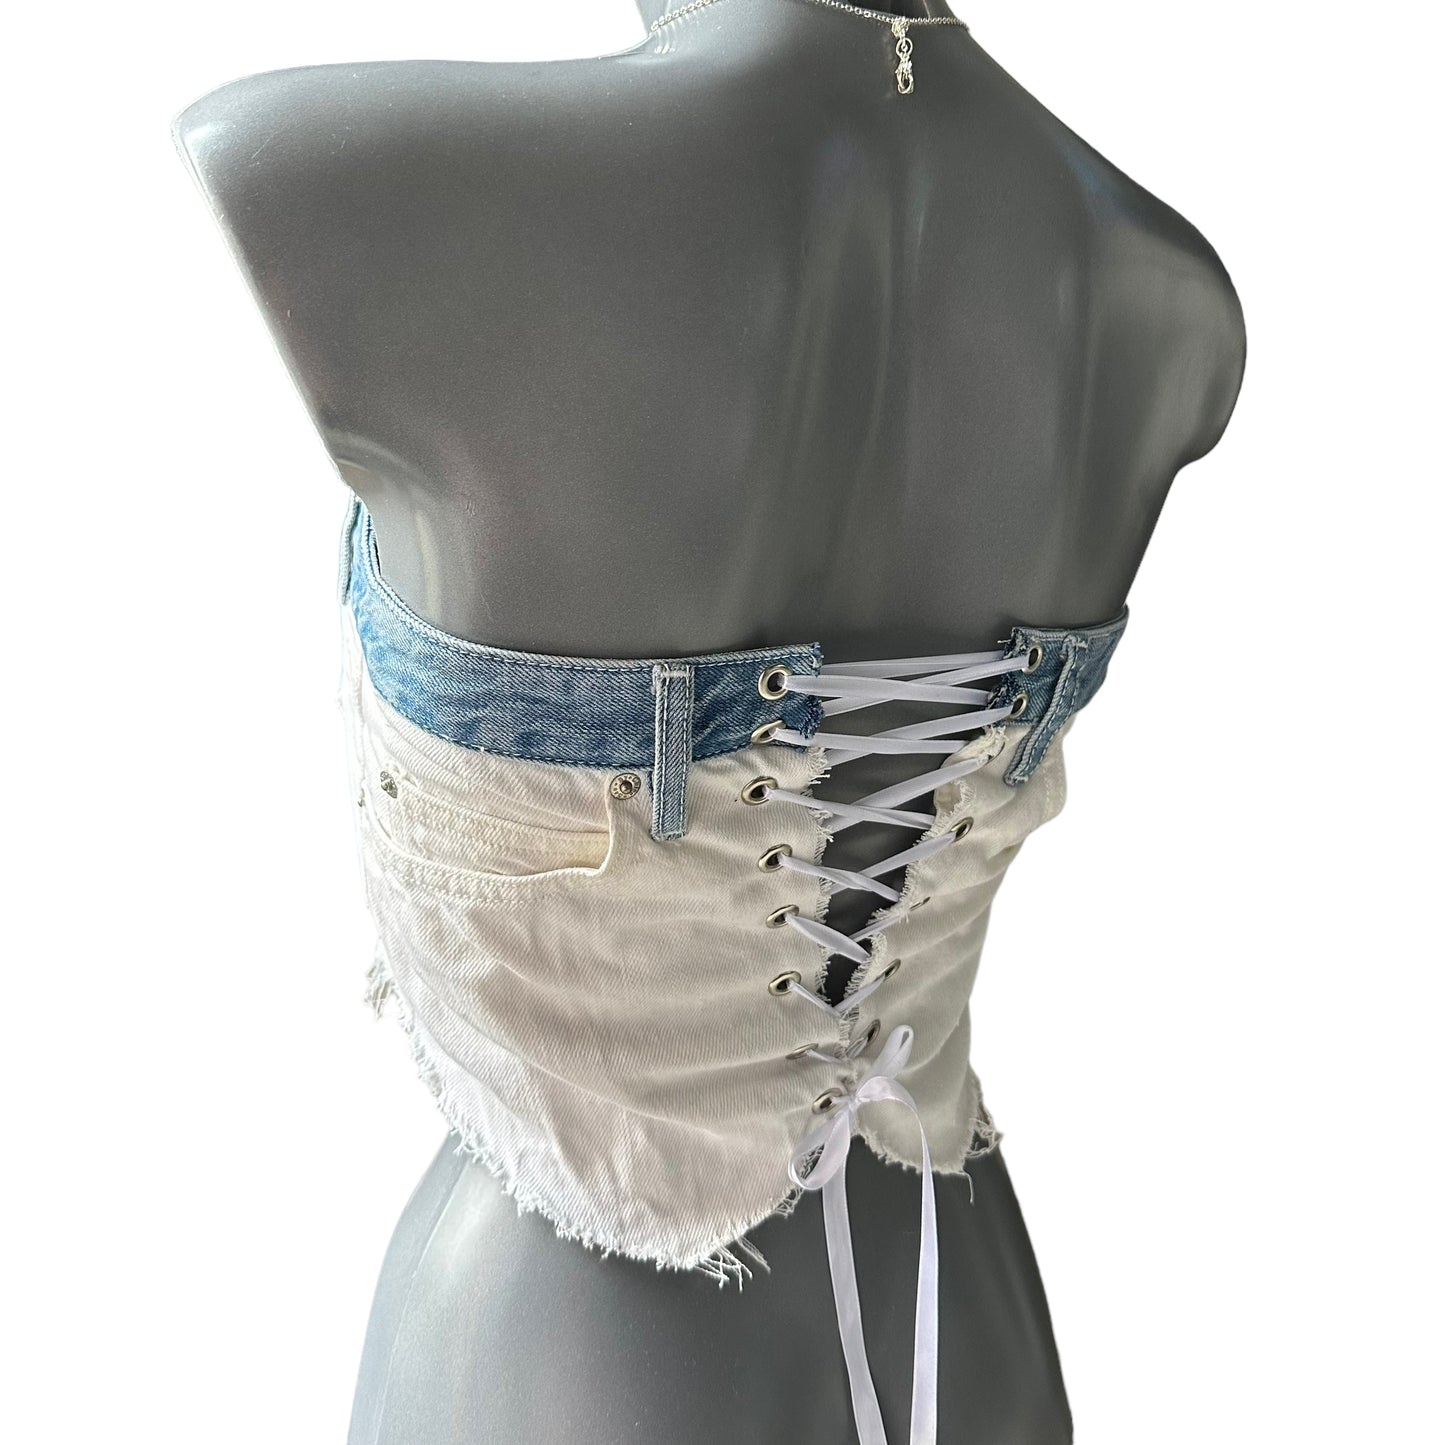 Authentic Chloe Jeans Reworked into a White Denim Corset Top 6 8 10